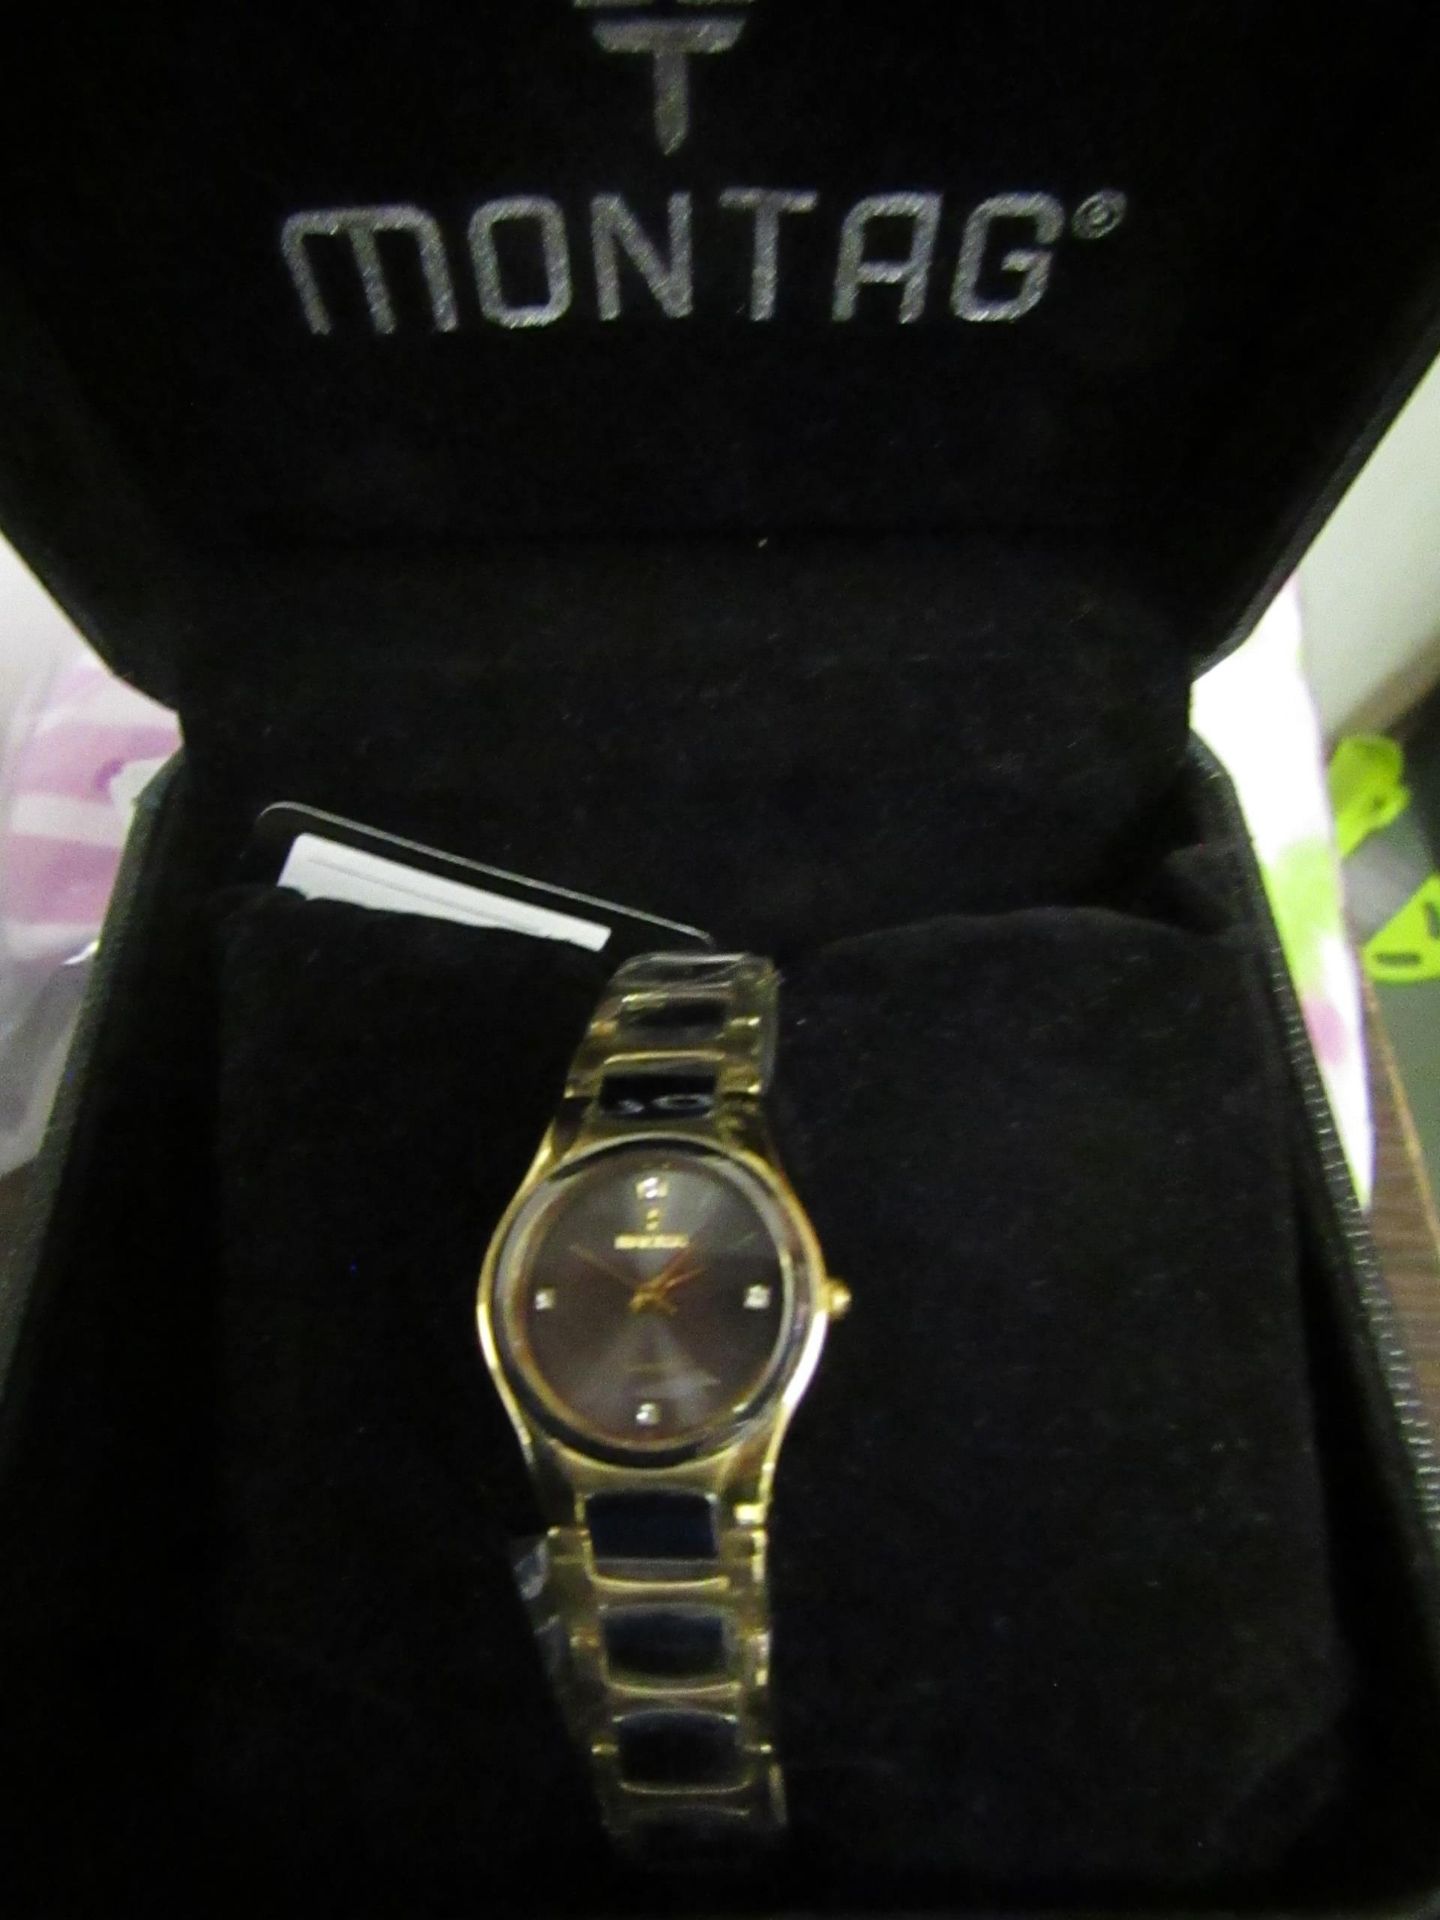 Montag Watch Ladies,Needs New Battery,Boxed